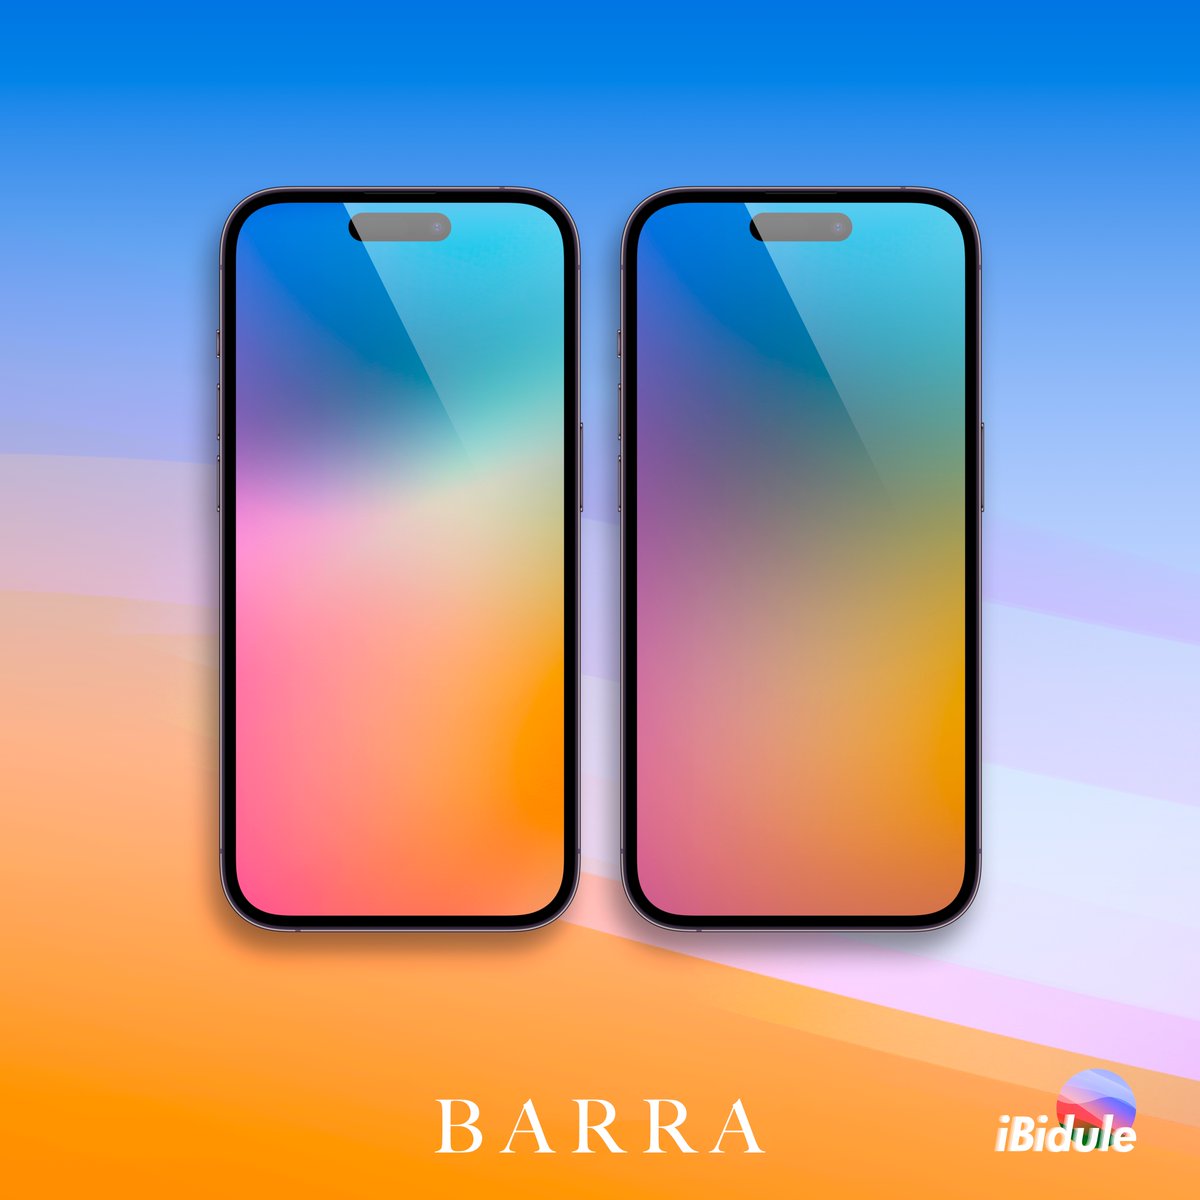 Hi people...    

'BARRA' nice gradients by iBidule

#Apple 
#Gradients 
#Wallpapers 
#iPhone15ProMax 
#iPhone15Pro 
#iPhone14ProMax 
#iPhone14Pro 
#iPhone13ProMax 
#iPhone13Pro 
#iPhoneX 

Please RT & Follow for more...  

Wallpapers⬇️ drive.google.com/drive/folders/… 

Enjoy ;)